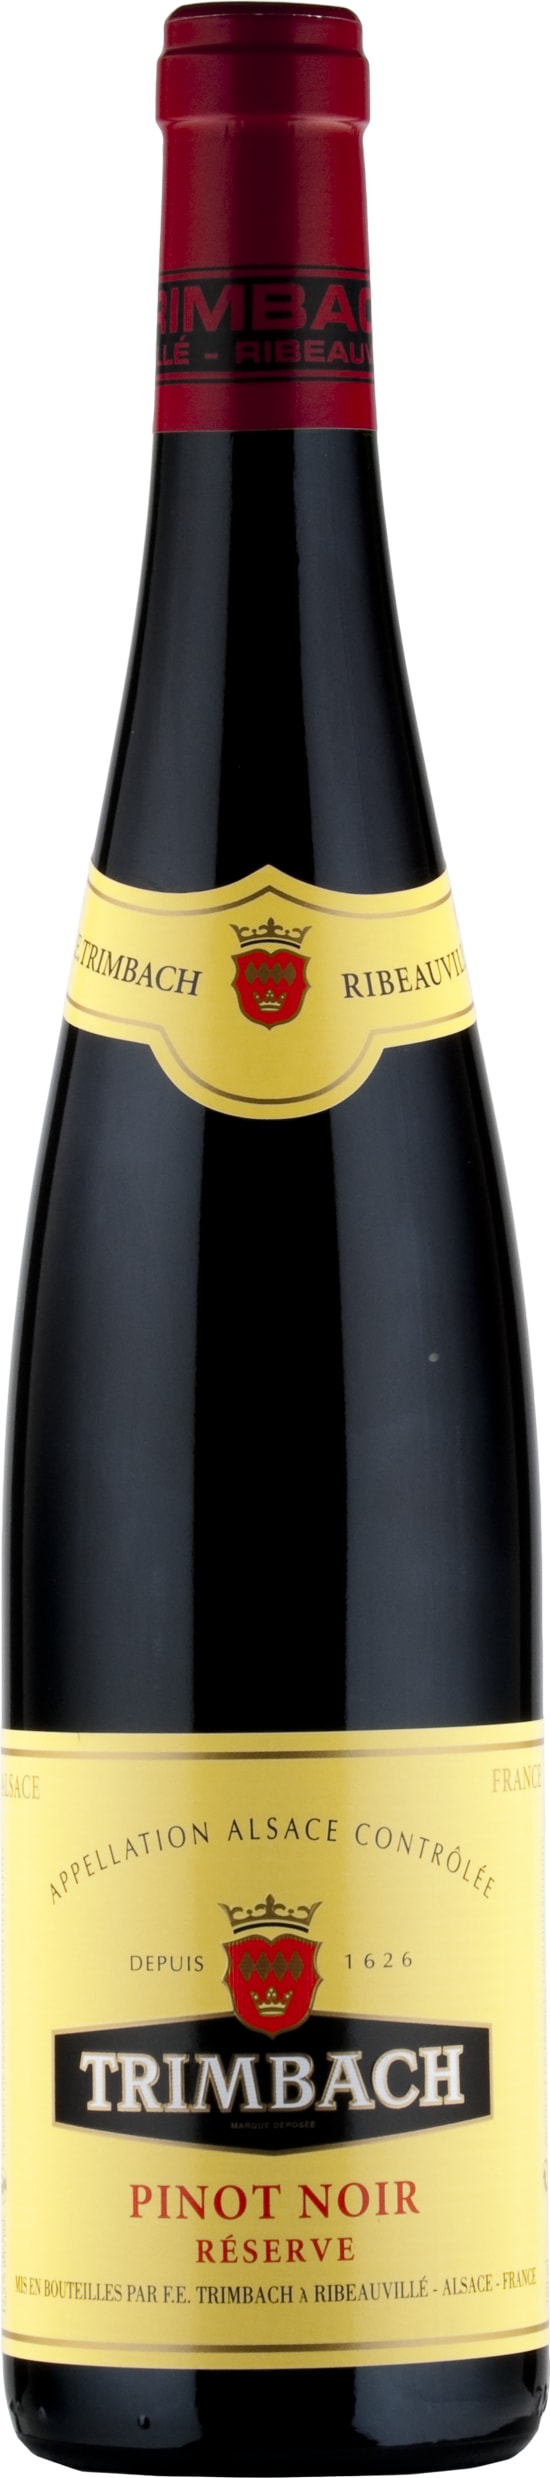 Trimbach Pinot Noir Reserve 2021 75cl - Buy Trimbach Wines from GREAT WINES DIRECT wine shop